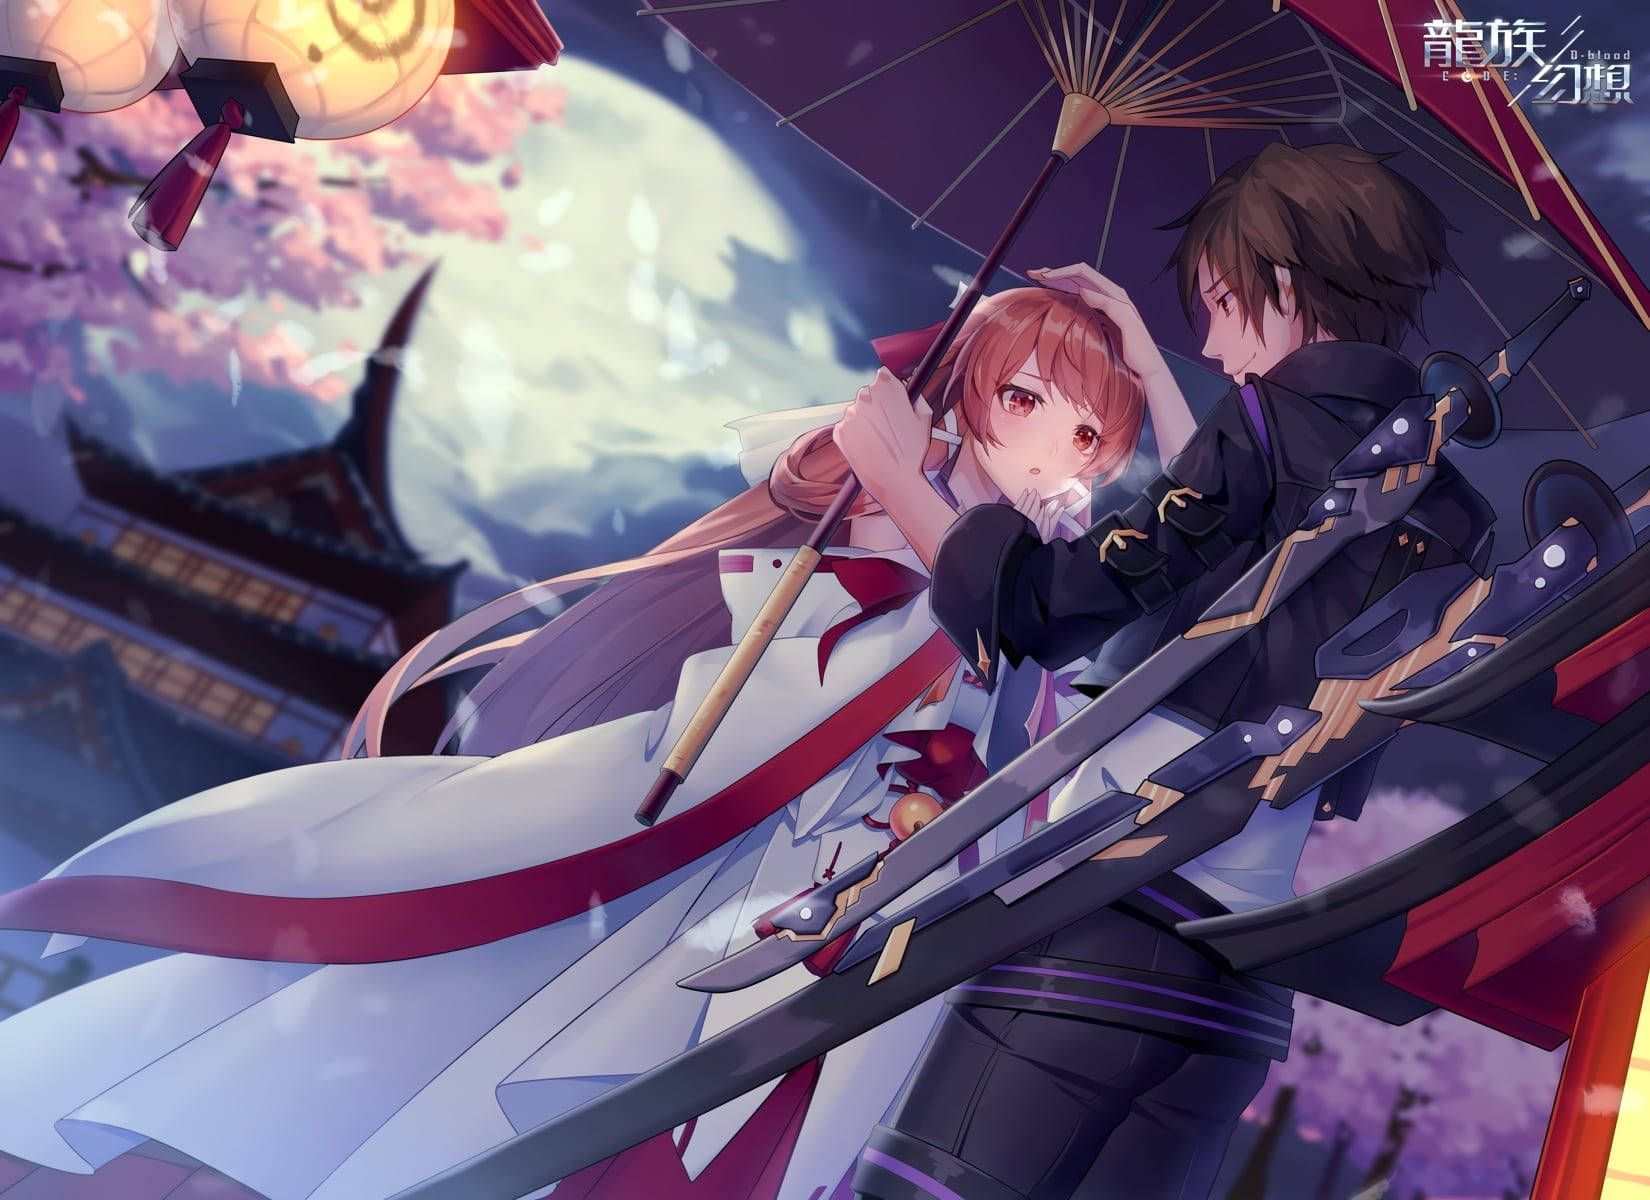 Download Code D Blood Aesthetic Anime Couple Wallpaper